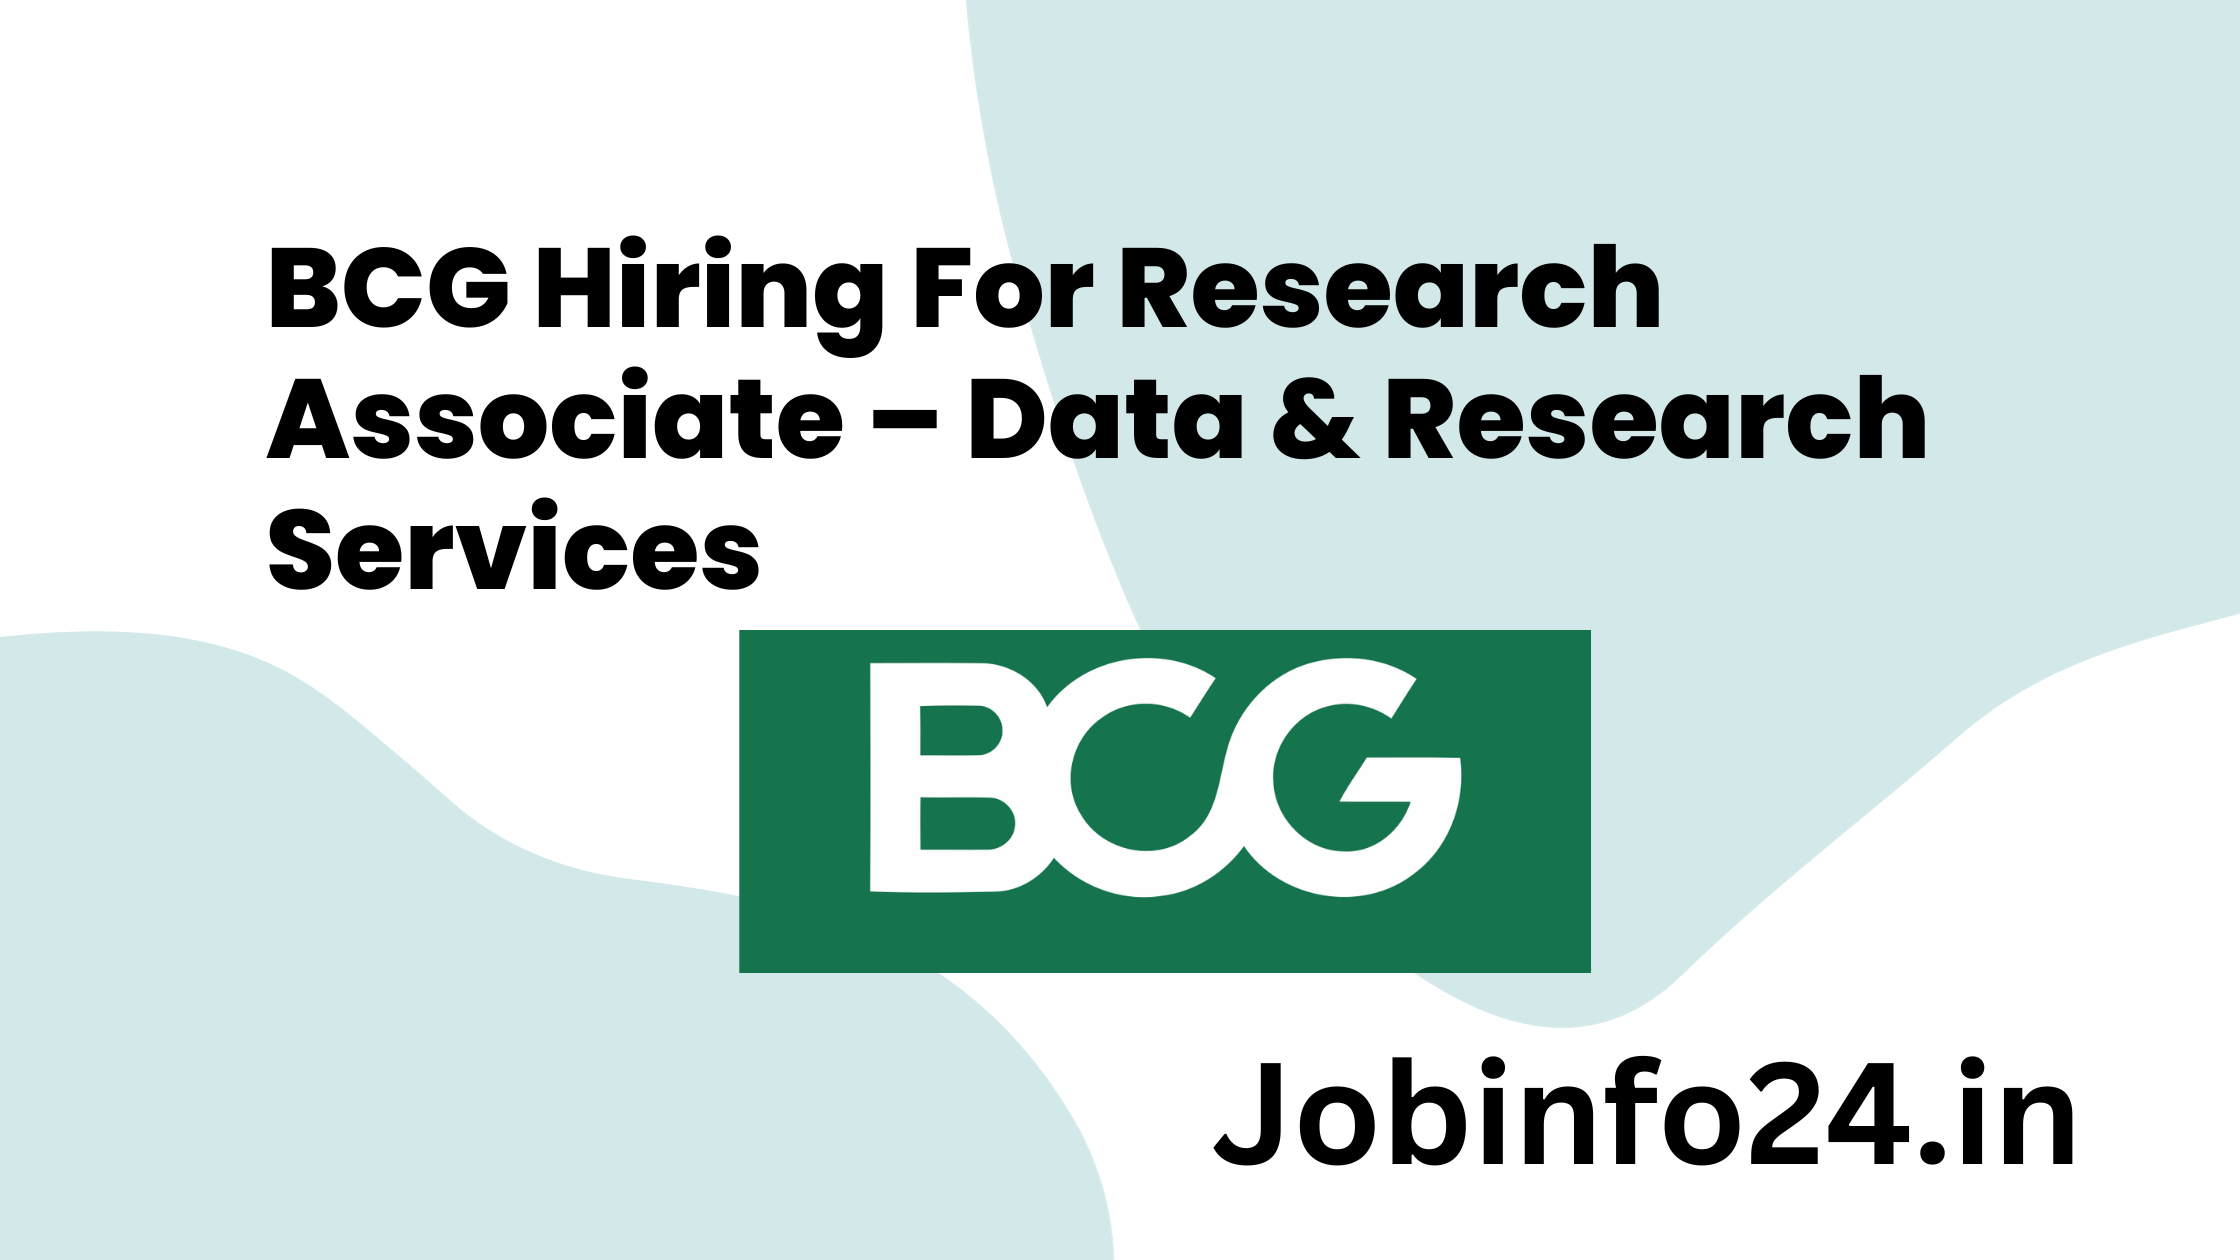 BCG Hiring For Research Associate – Data & Research Services